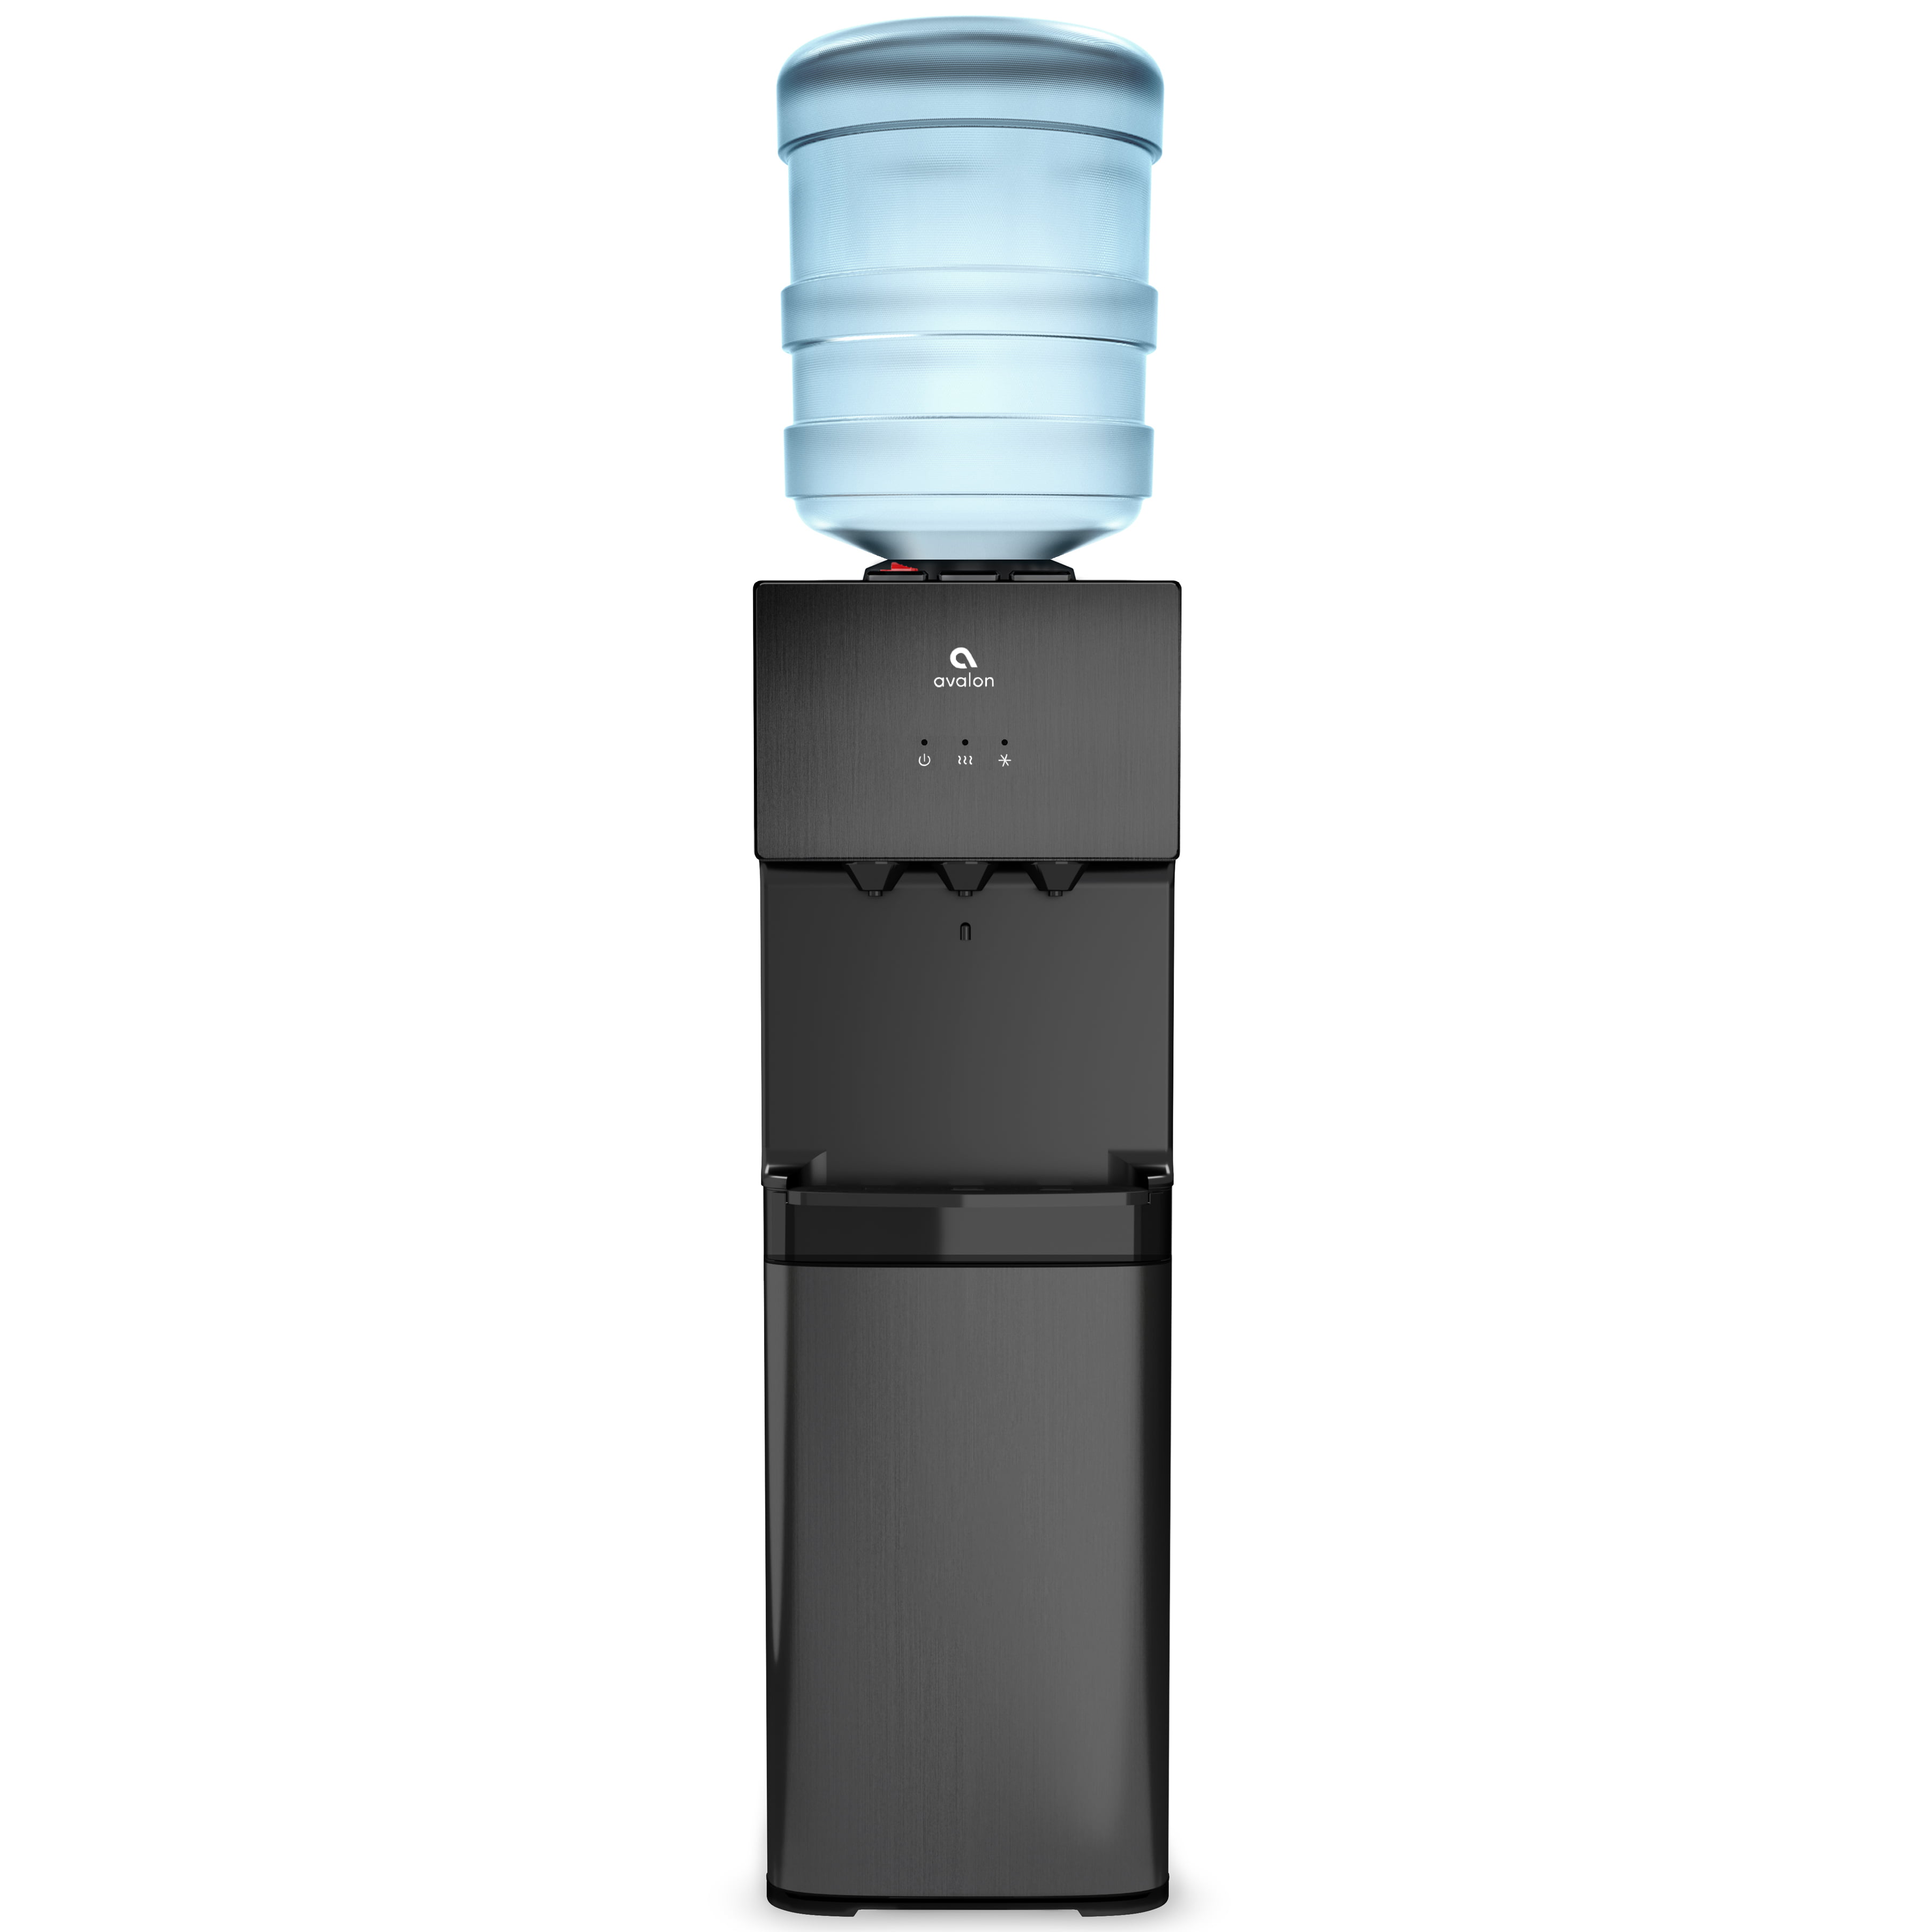 Avalon Top Loading Water Cooler Dispenser - 3 Temperature, Child Safety Black Stainless Steel Water Cooler